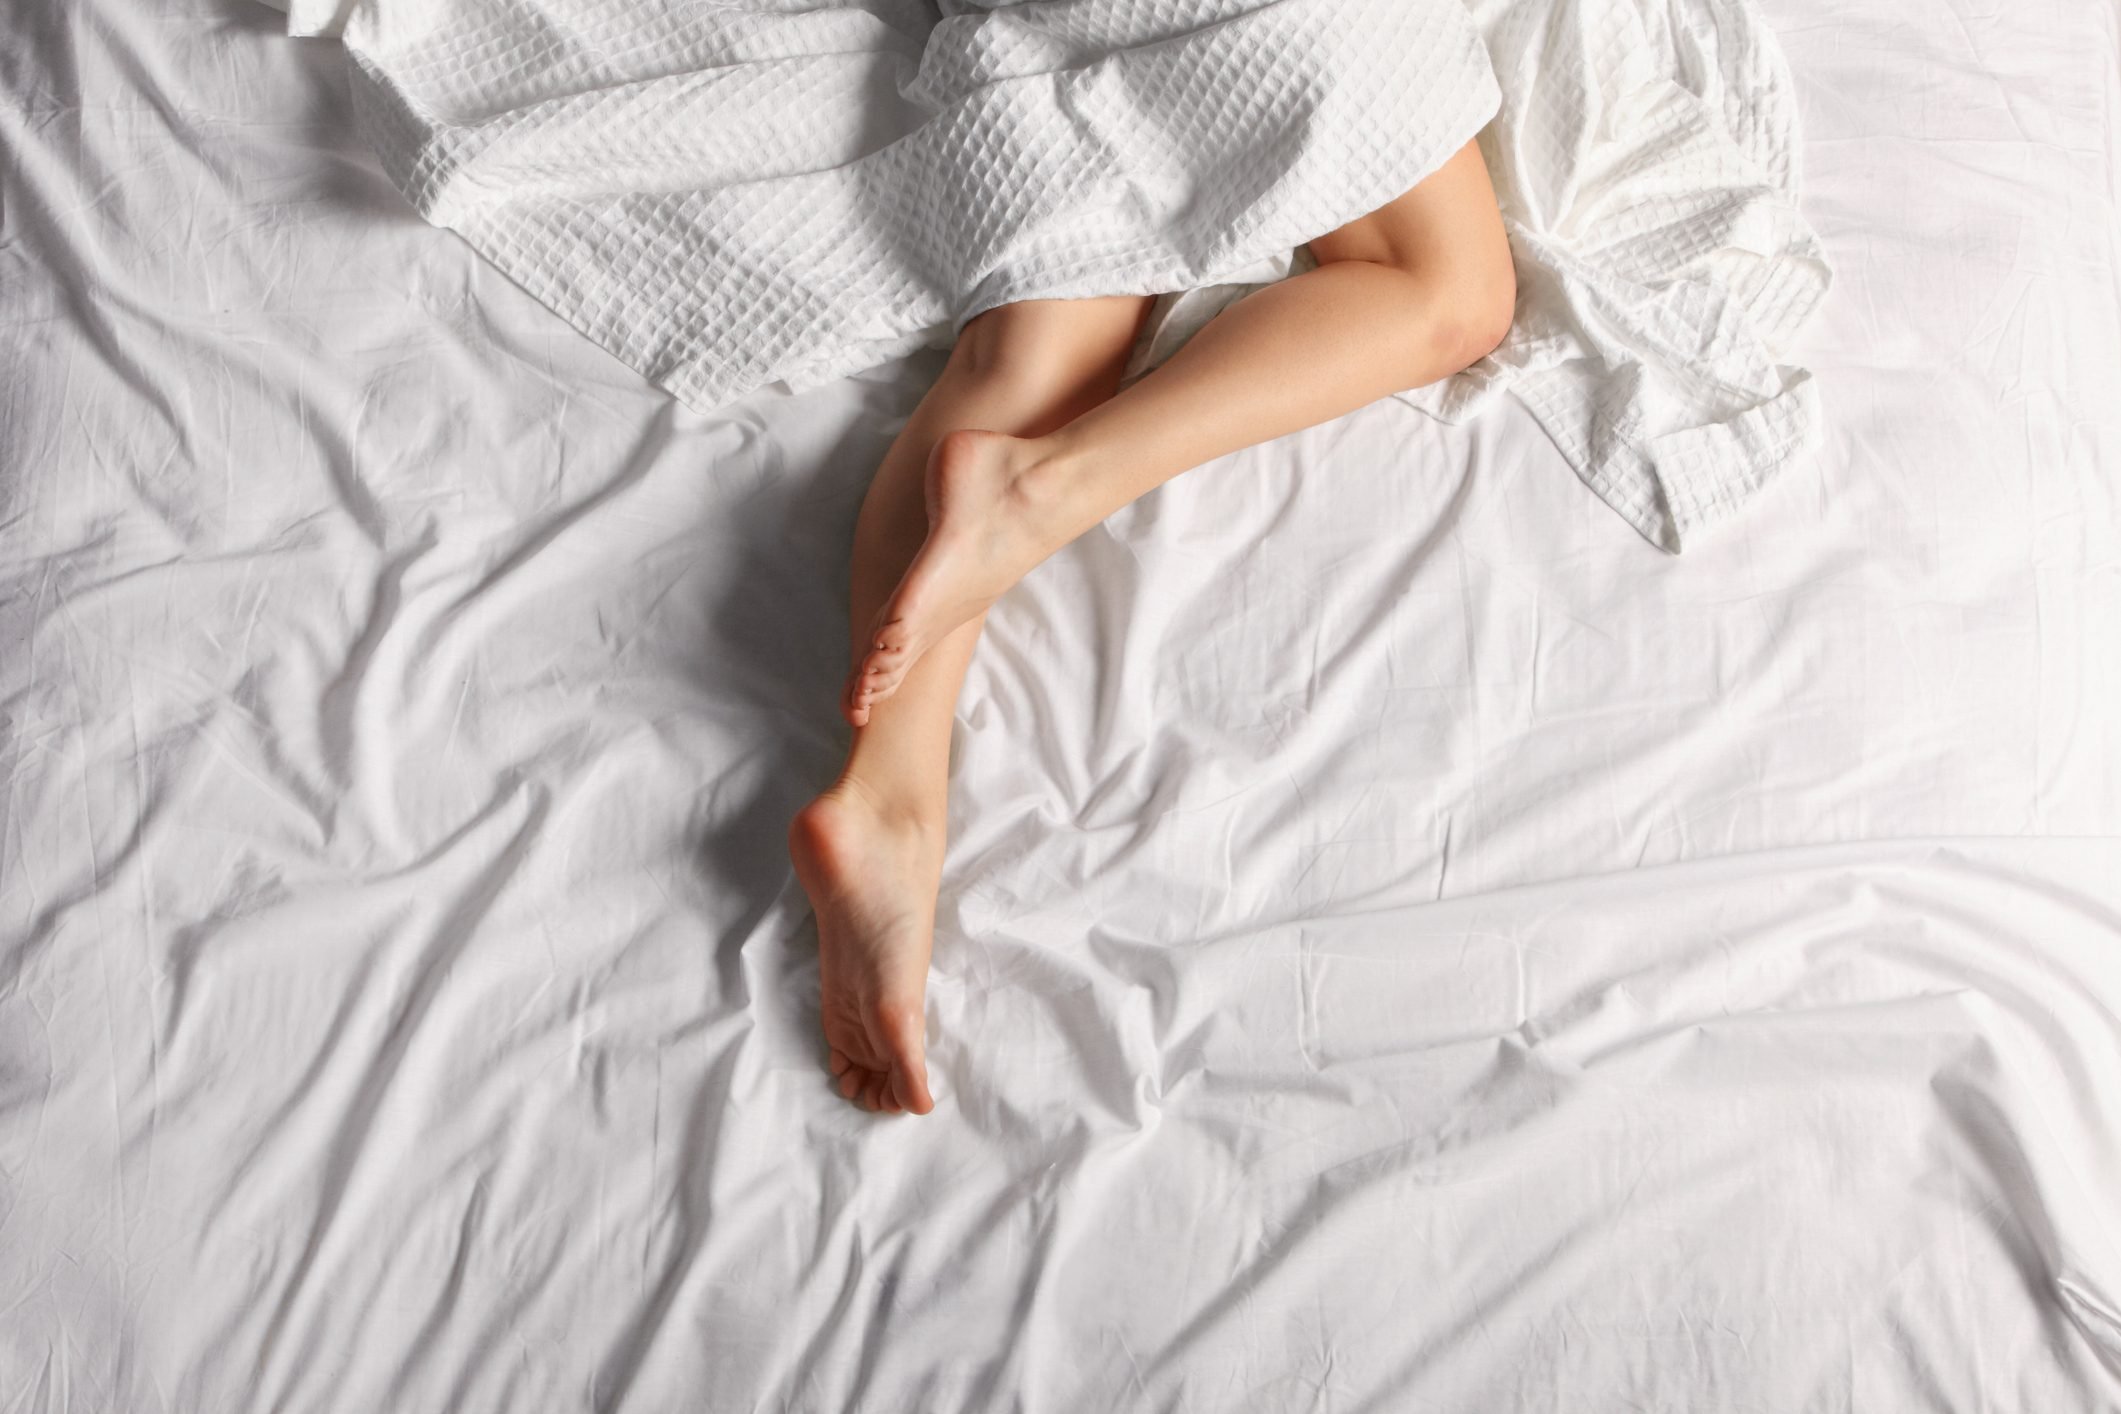 What are the effects of sleeping without pants? - Quora